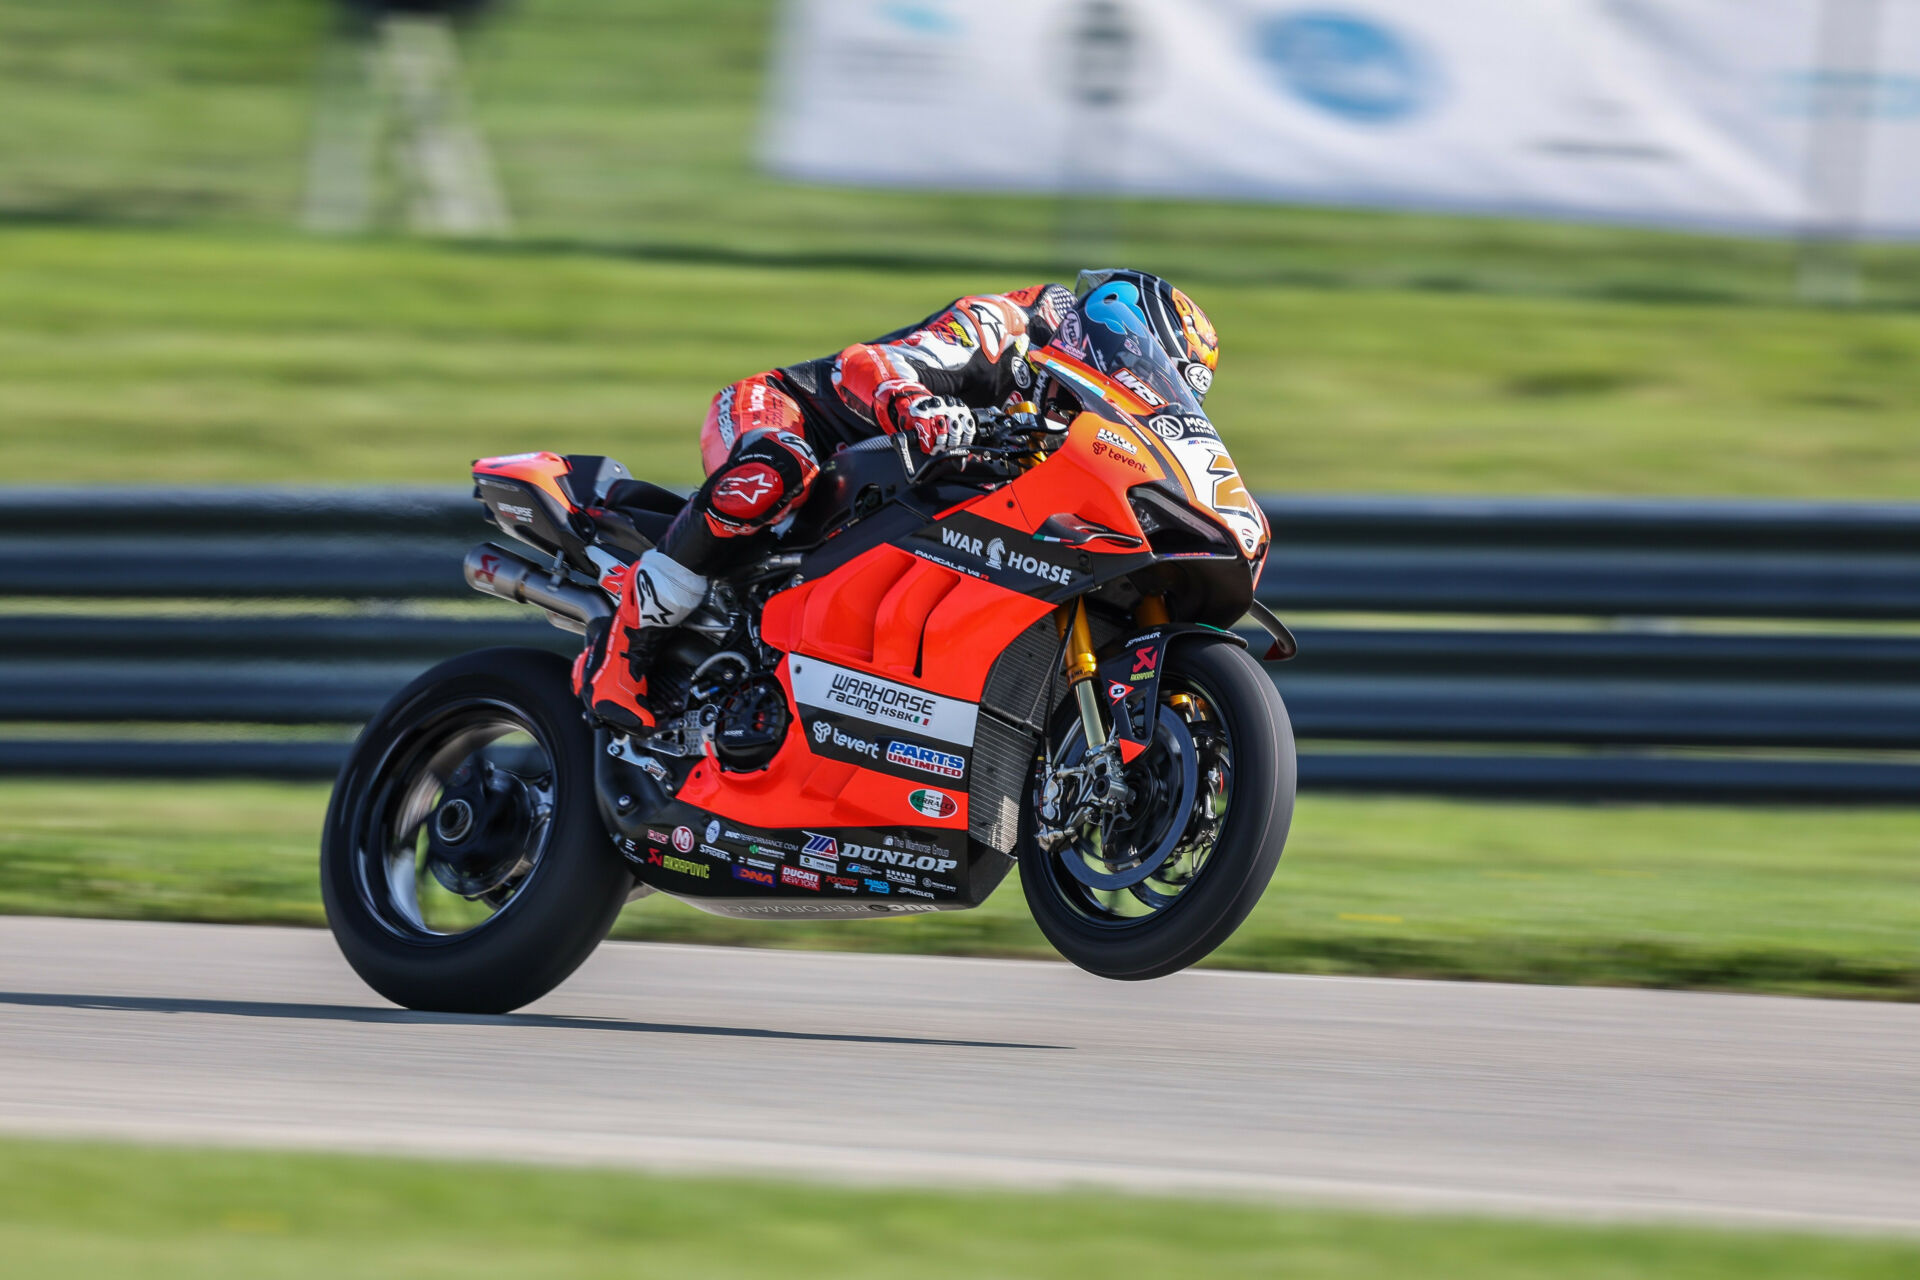 Josh Herrin (2) in action at PittRace. Photo by Brian J. Nelson, courtesy Ducati.